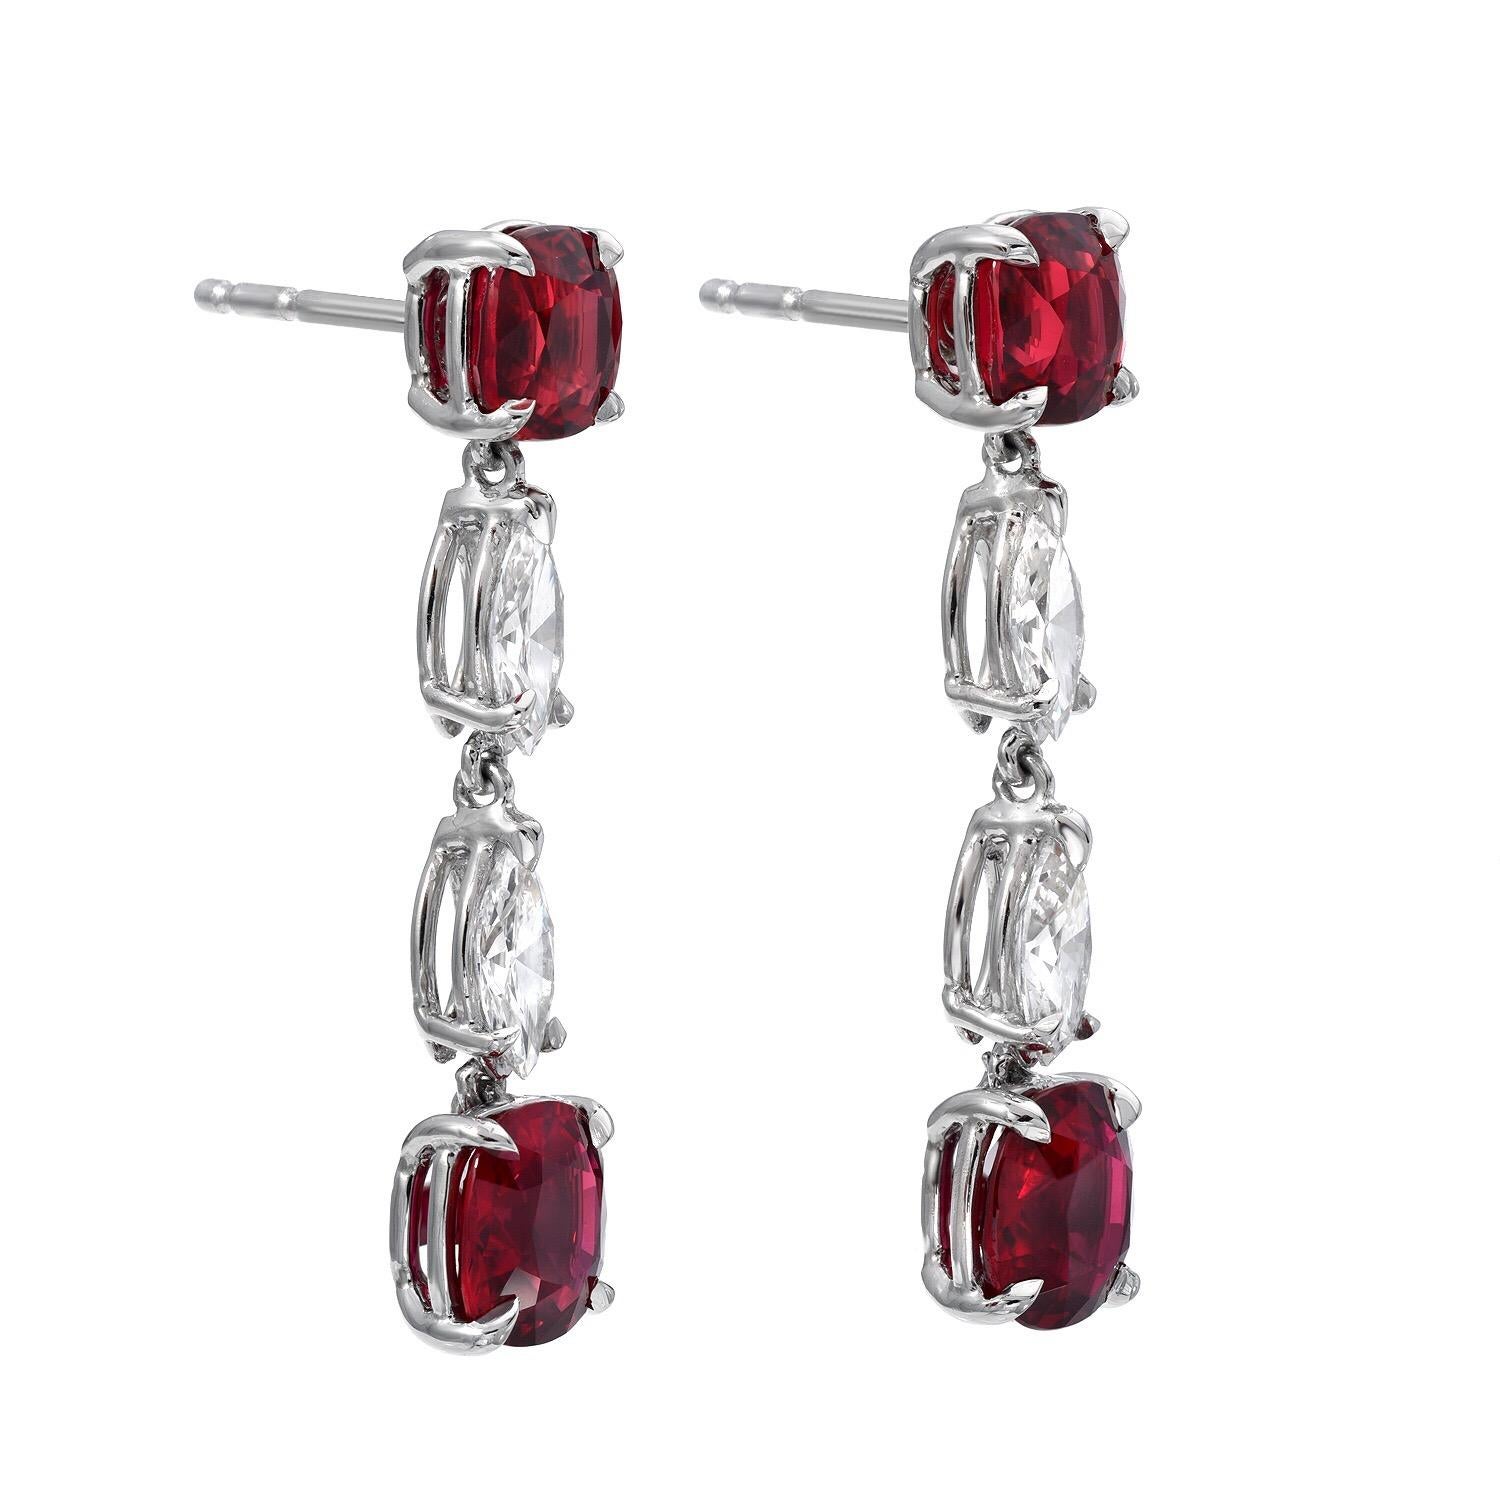 Exceptional GIA certified, natural, unheated Ruby and diamond earrings in platinum. 
This exclusive Ruby set, weighs a total of 4.35 carats; 2.06 carats on the top, and 2.29 carats on the bottom. The marquise shaped diamonds total 0.86 carats.
The